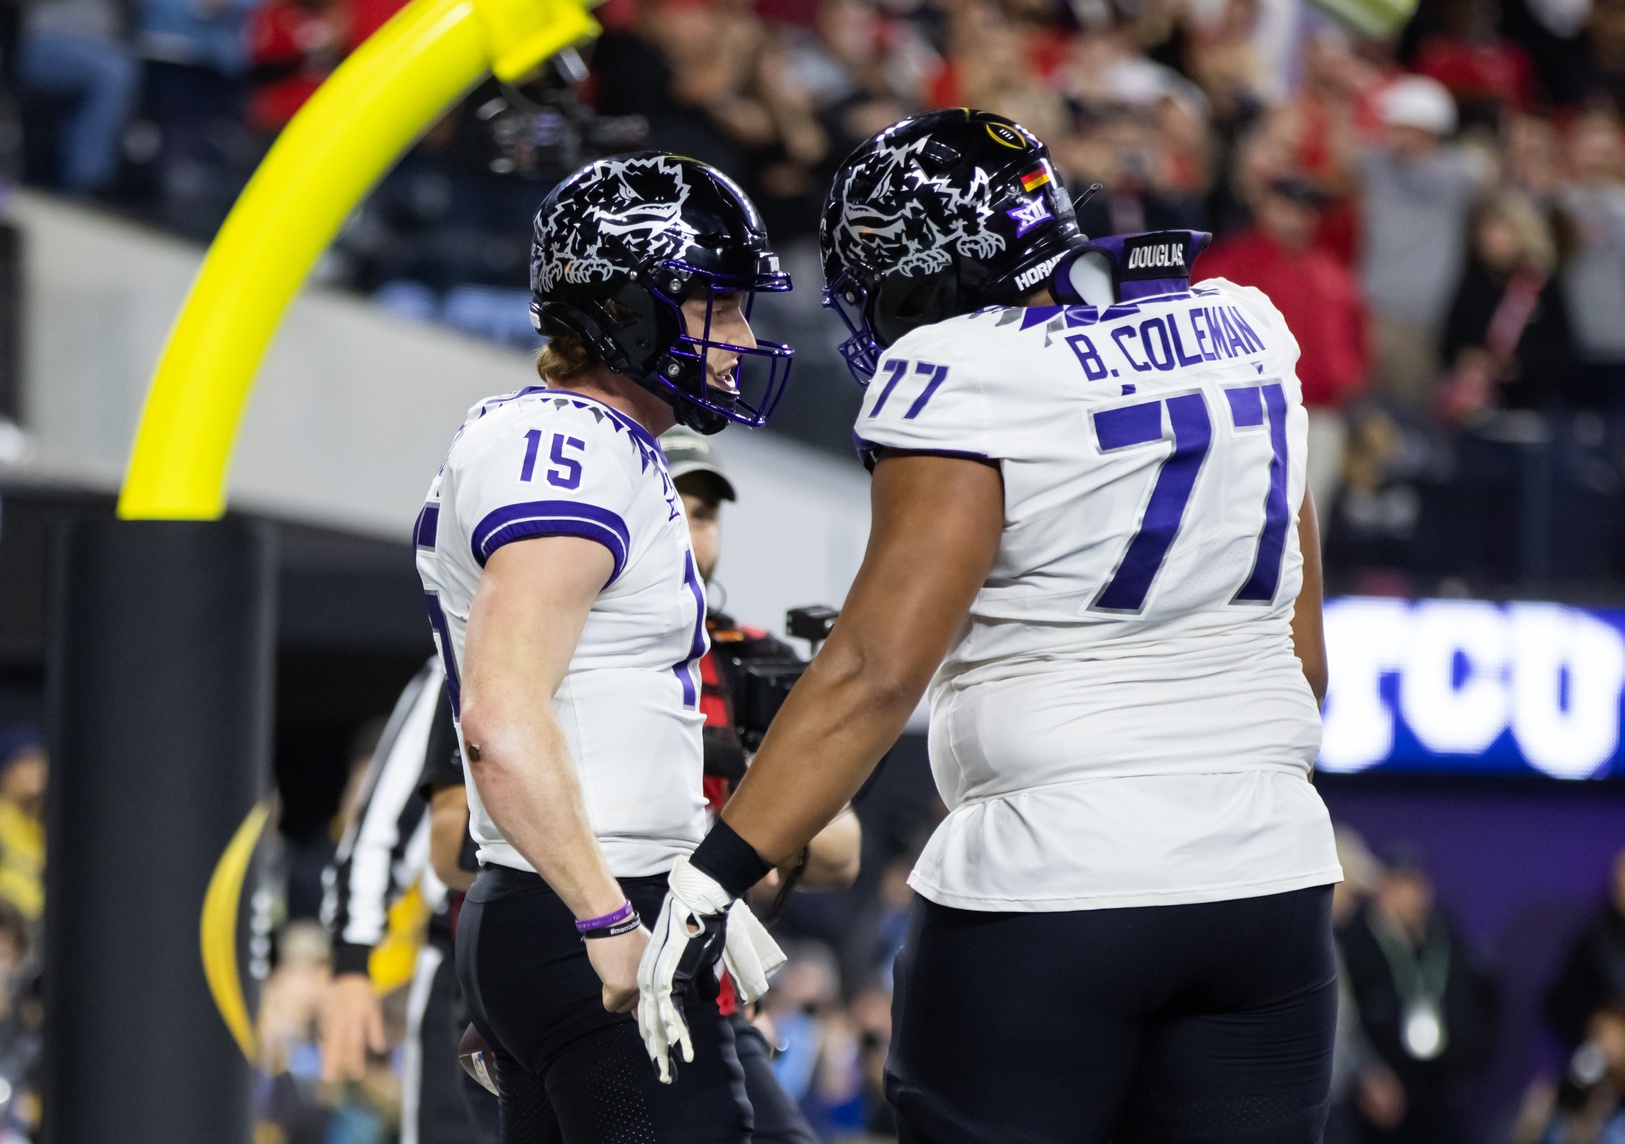 Max Duggan (15) celebrates a touchdown with offensive tackle Brandon Coleman (77) against the Georgia Bulldogs during the CFP national championship game at SoFi Stadium.